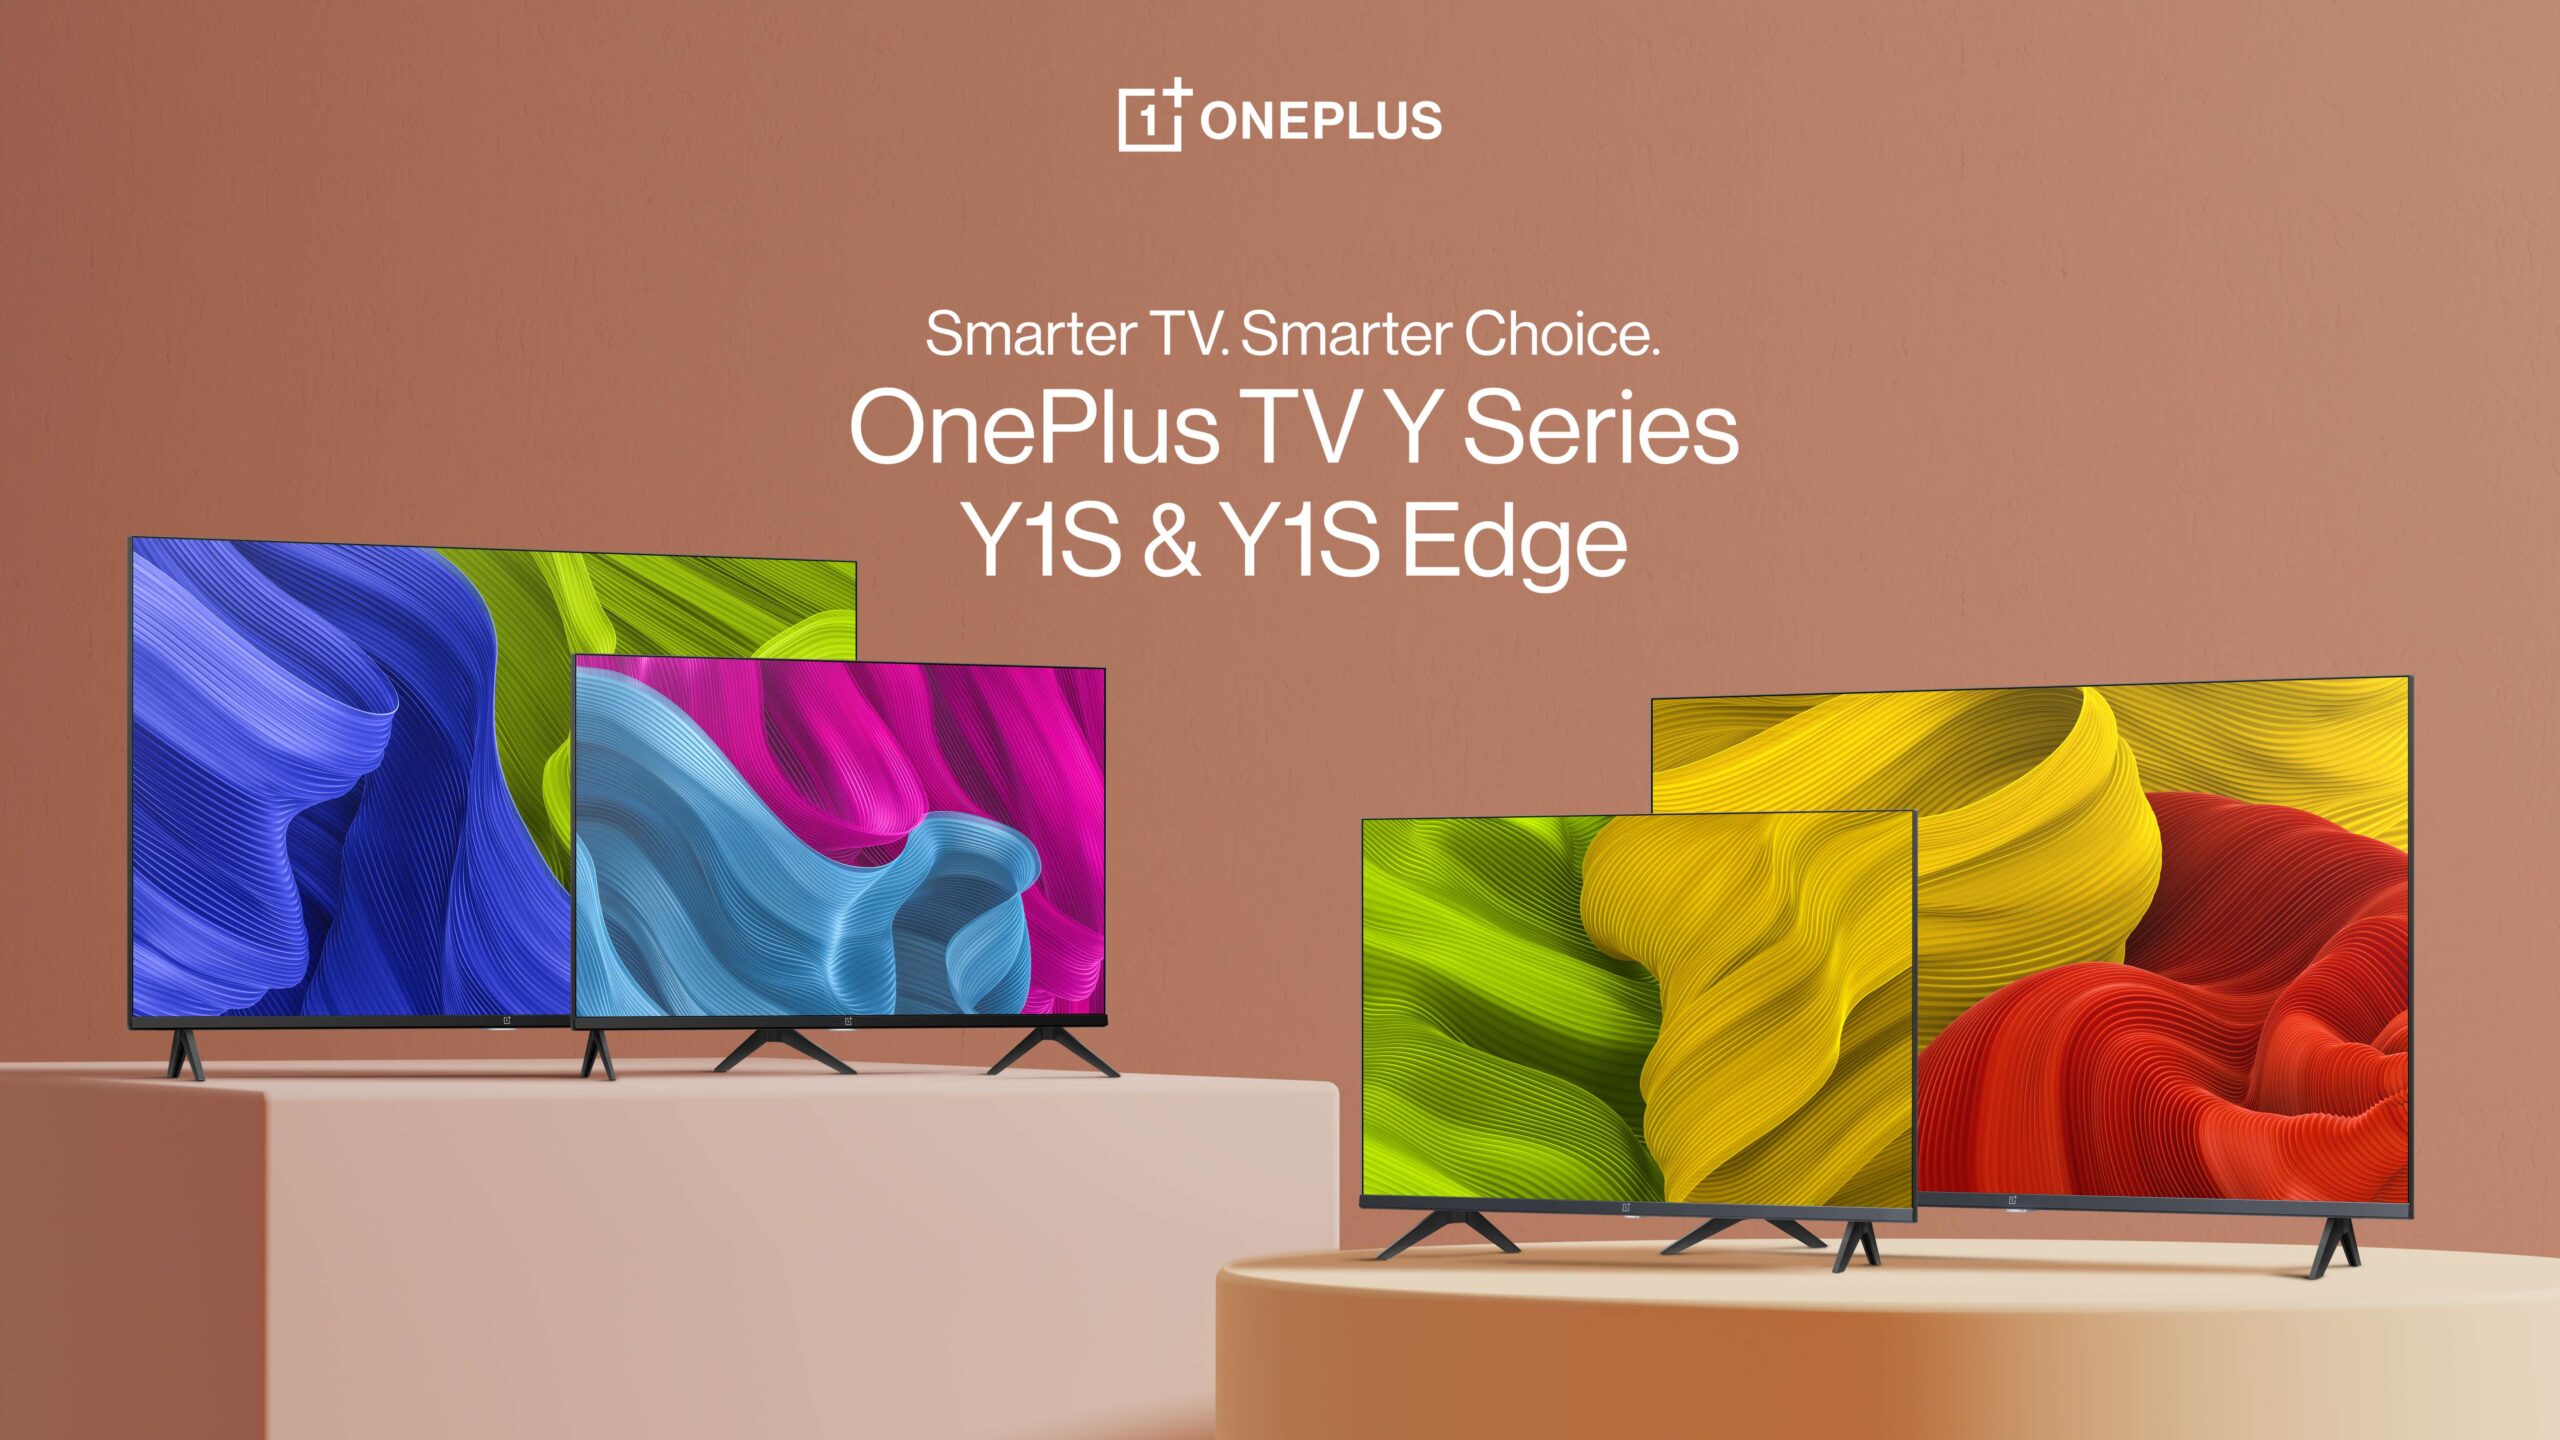 OnePlus TV Y1S and OnePlus TV Y1S Edge with 32 & 43 inch Screens Launched;  Price Starts at Rs. 16499 • TechVorm